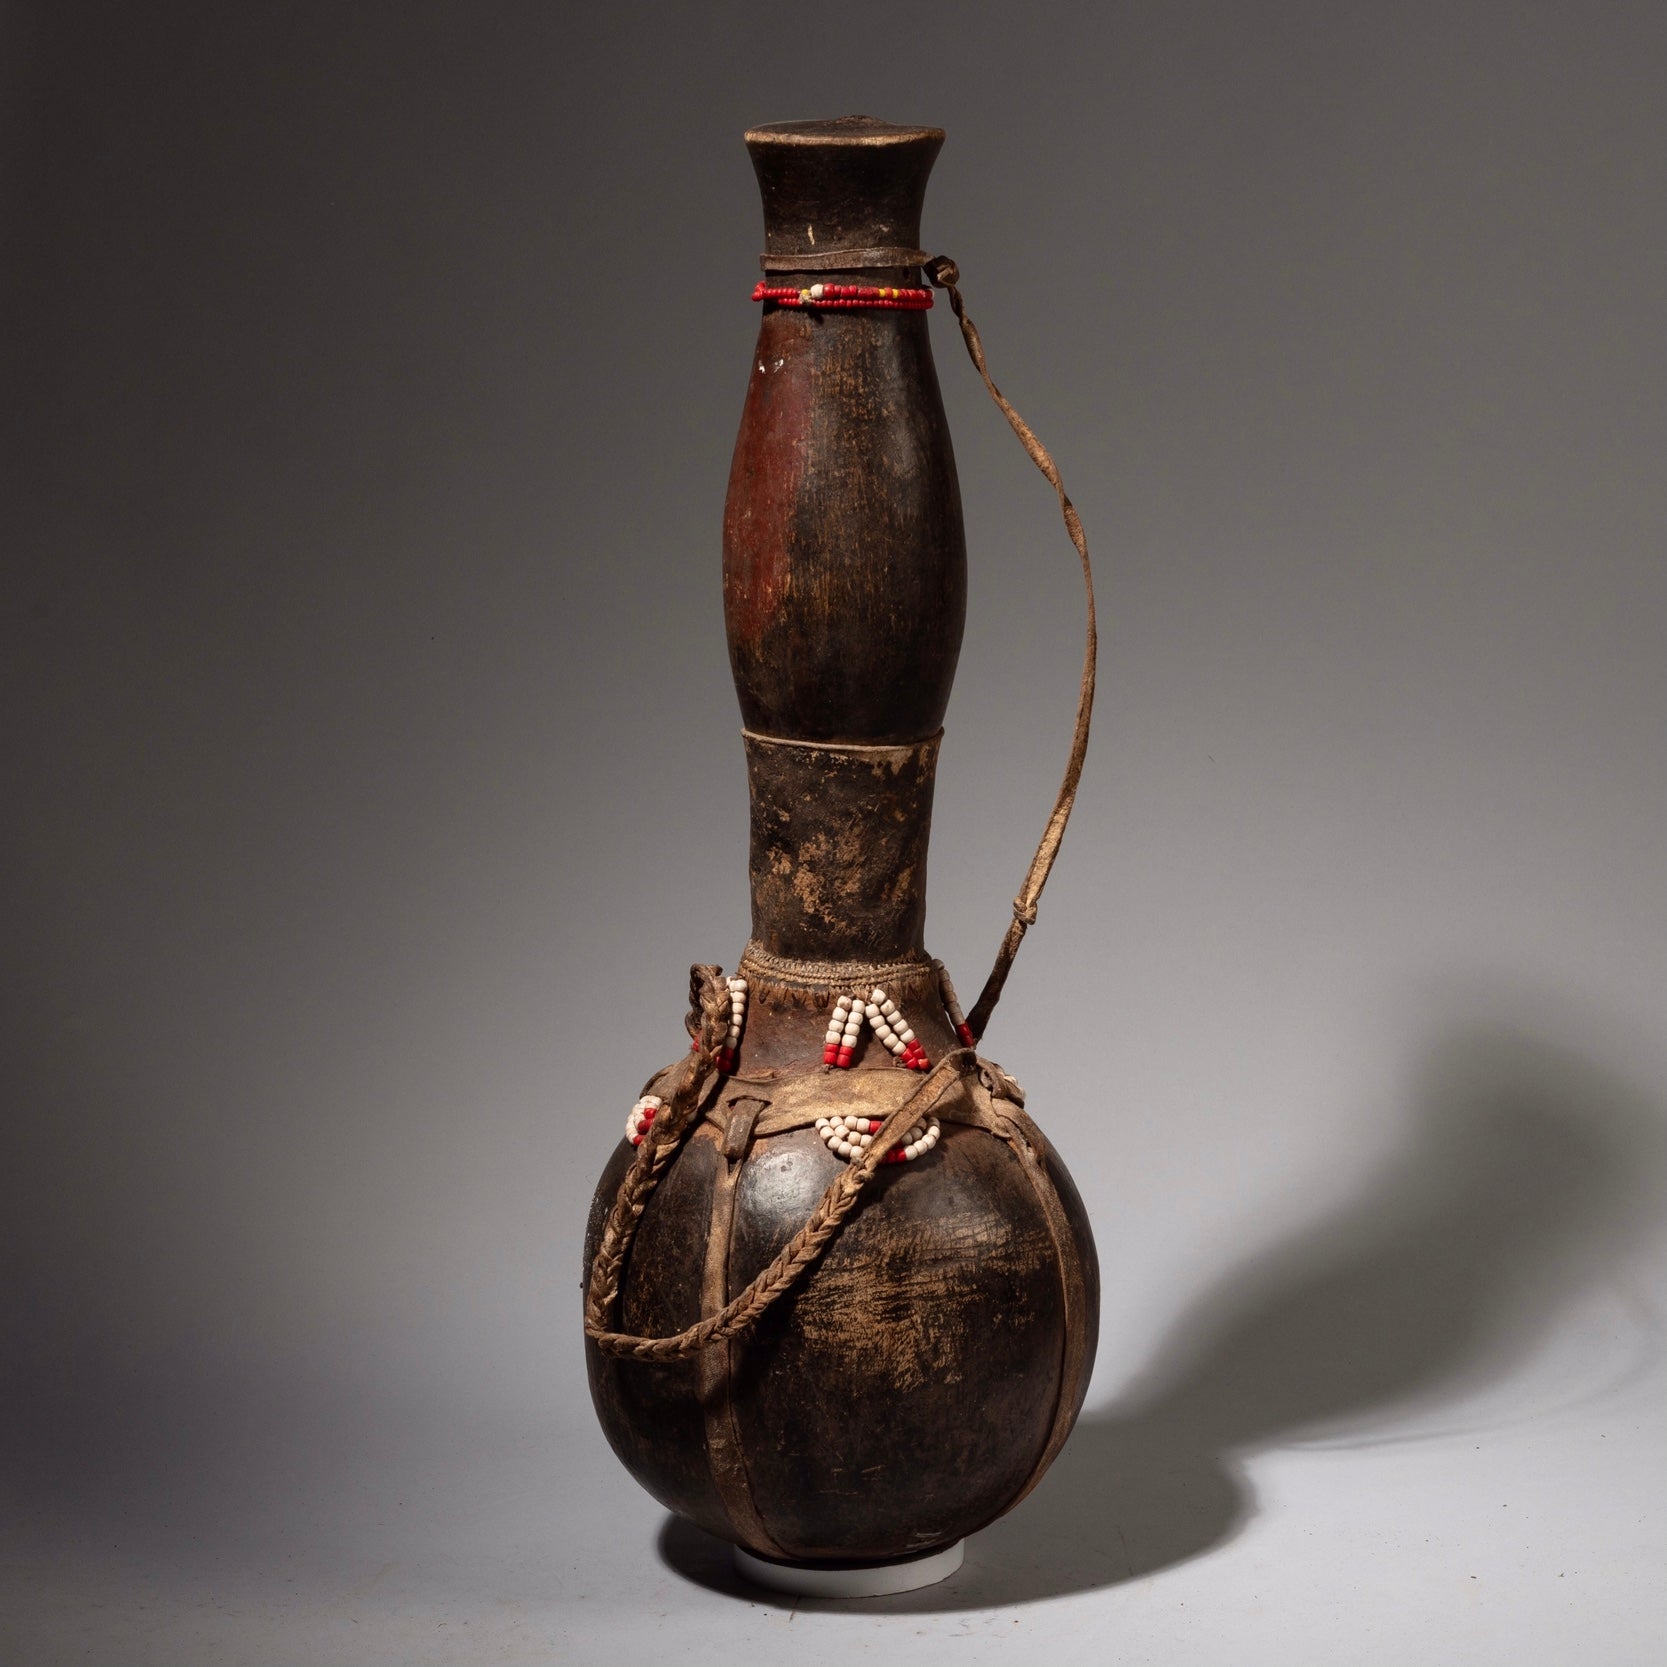 A WONDERFULLY PATINATED GOURD VESSEL FROM TURKANA TRIBE KENYA E. AFRICA ( No 1809)